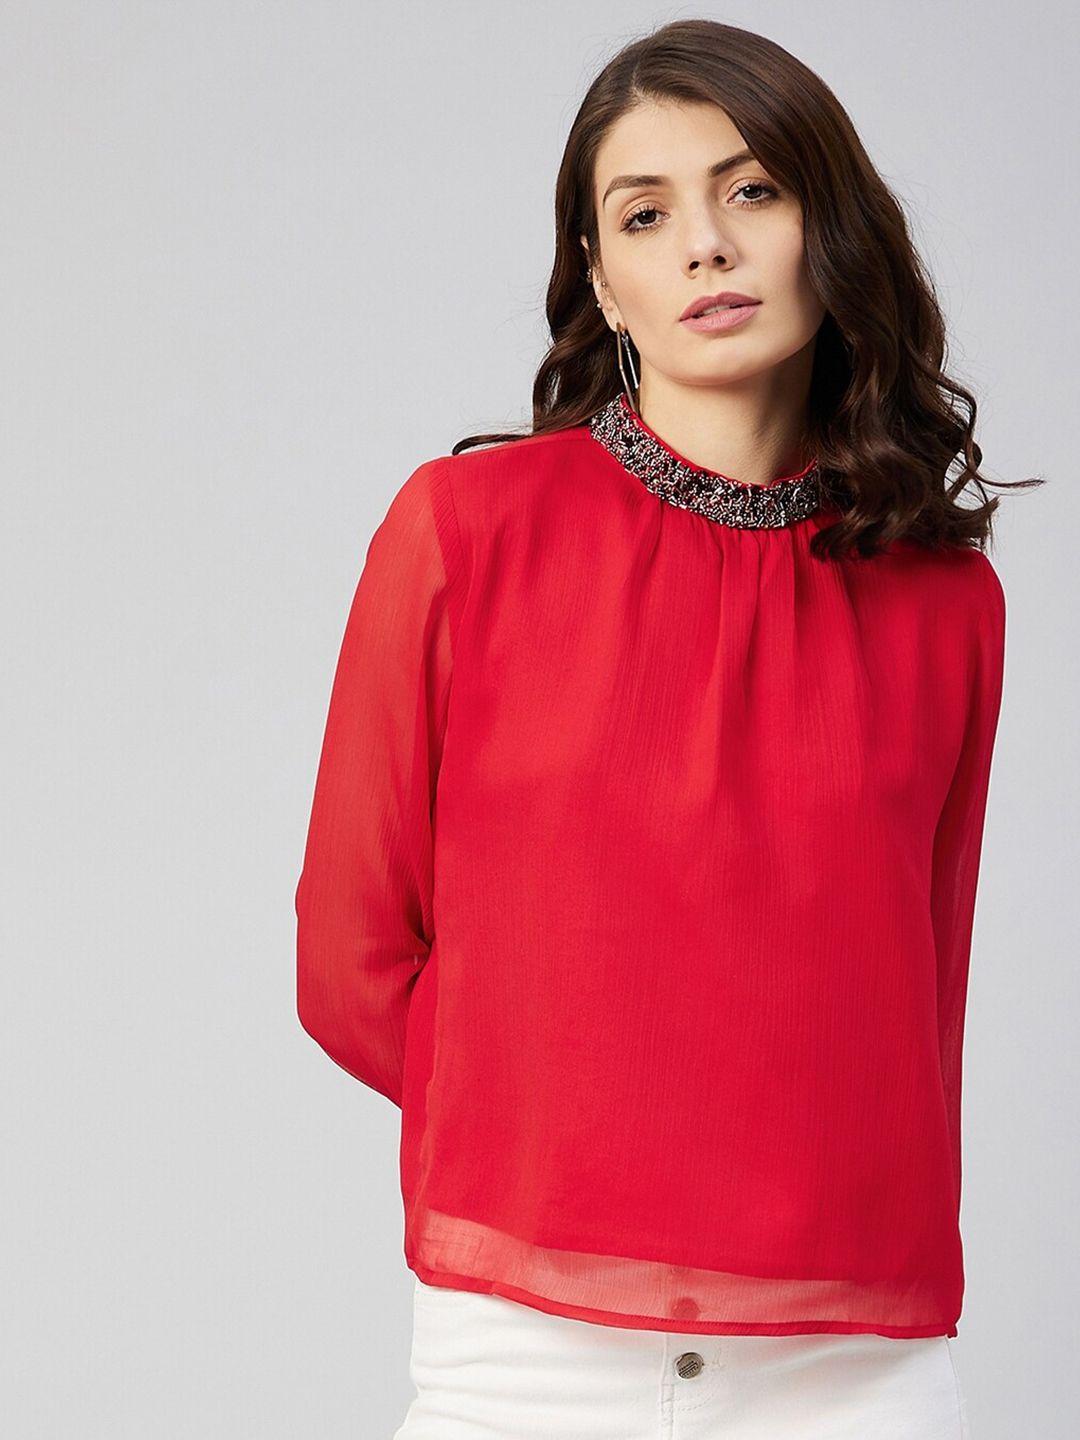 marie-claire-women-red-chiffon-jewel-neck-top